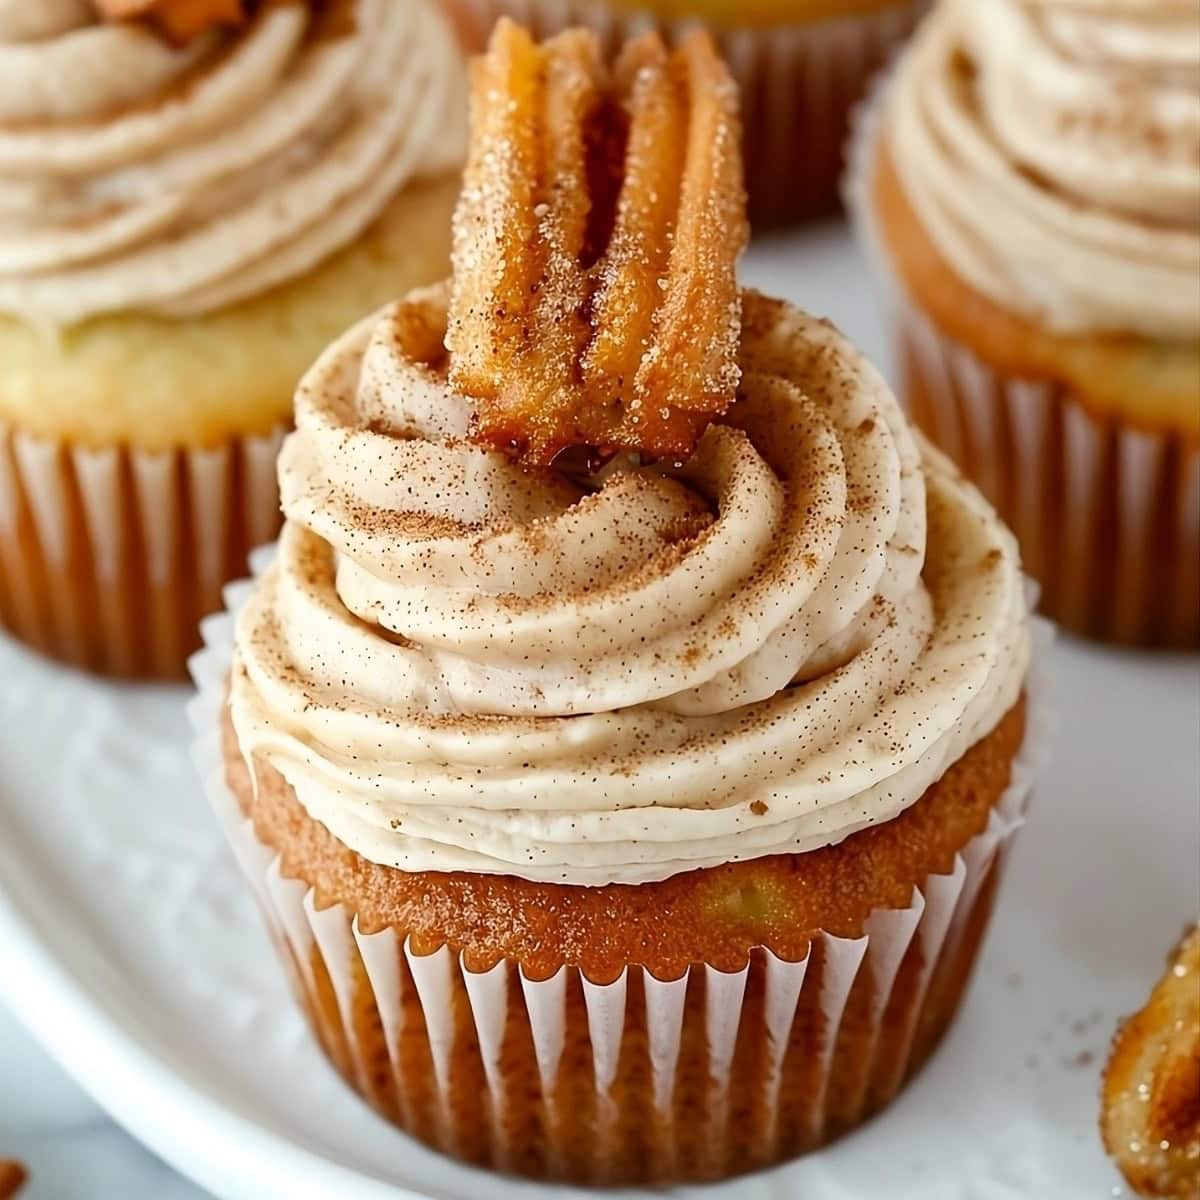 Closeup of churro cupcake on a plate with cinnamon frosting and piece of churro as garnish.